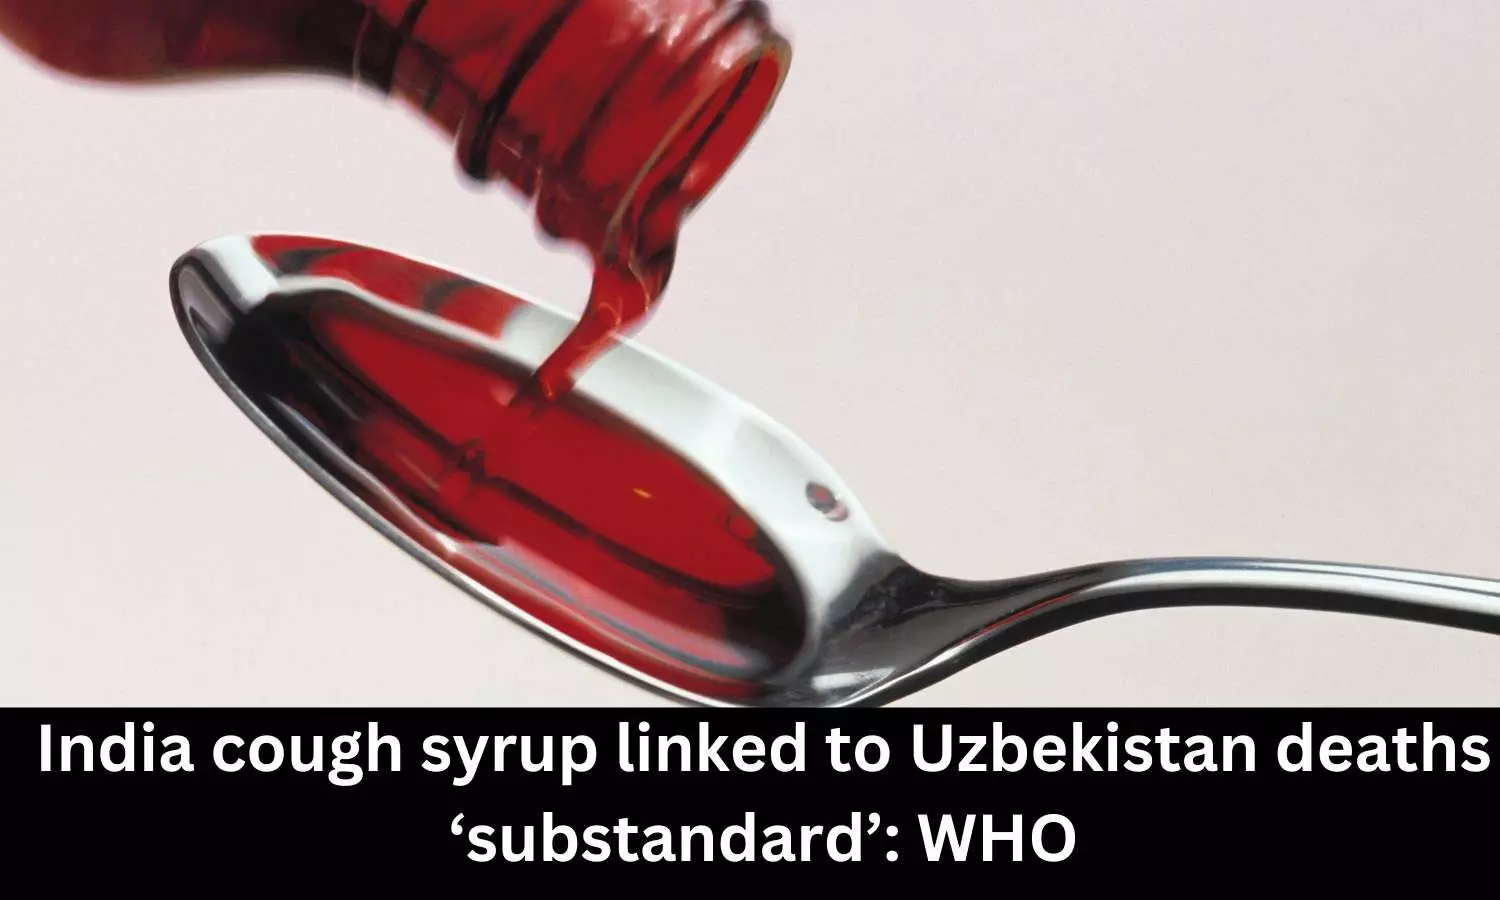 India cough syrup linked to Uzbekistan deaths ‘substandard’: WHO